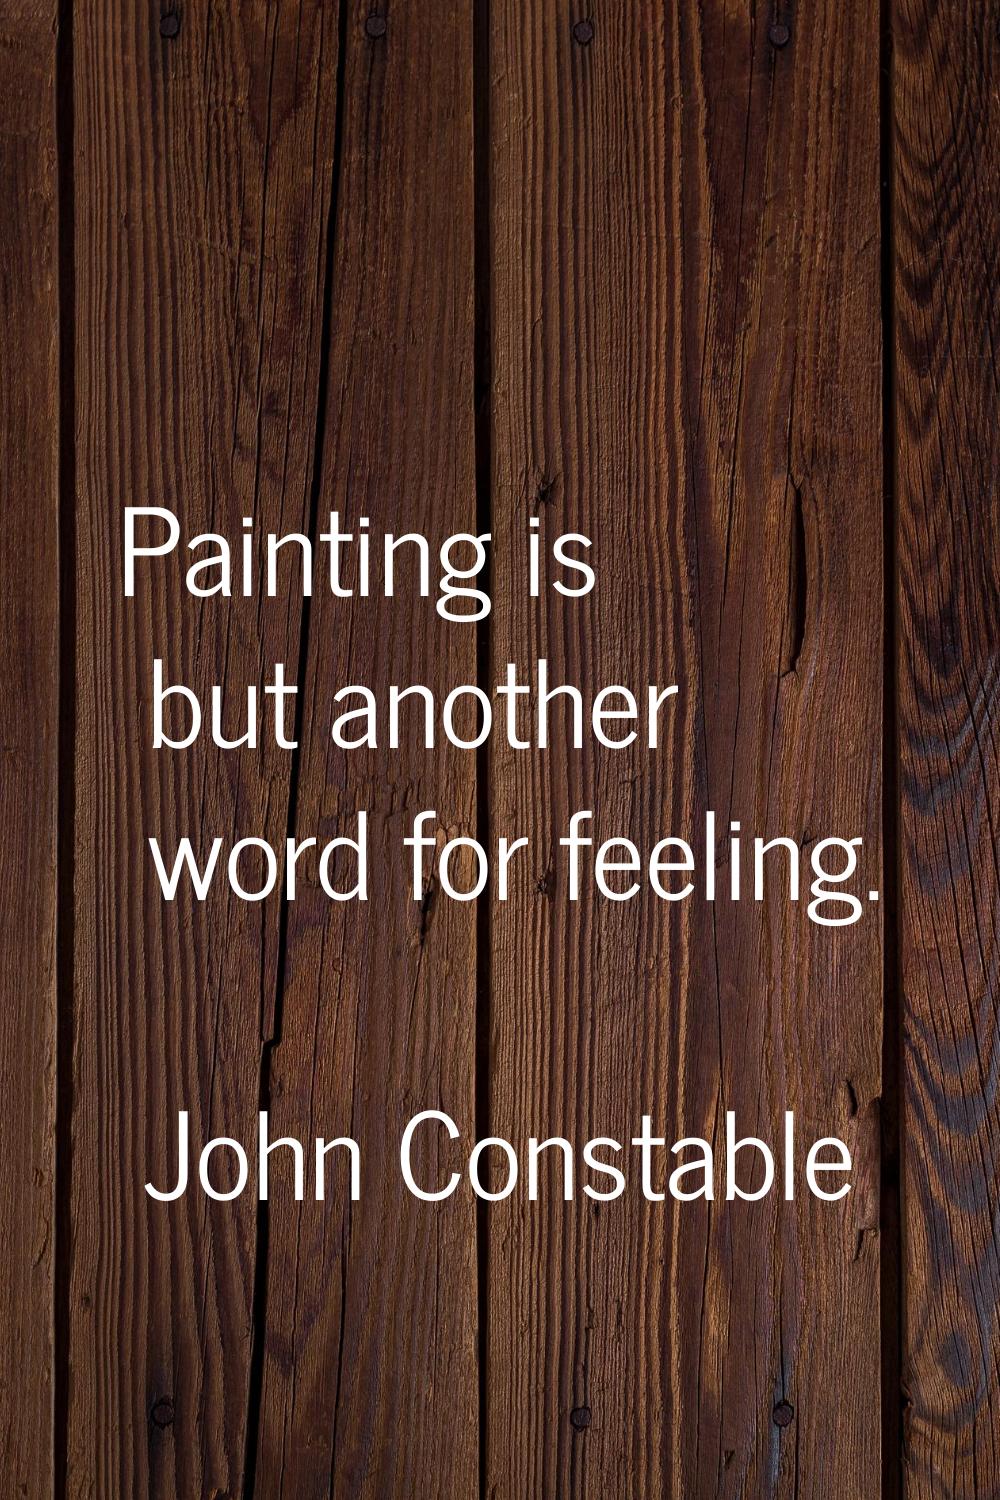 Painting is but another word for feeling.